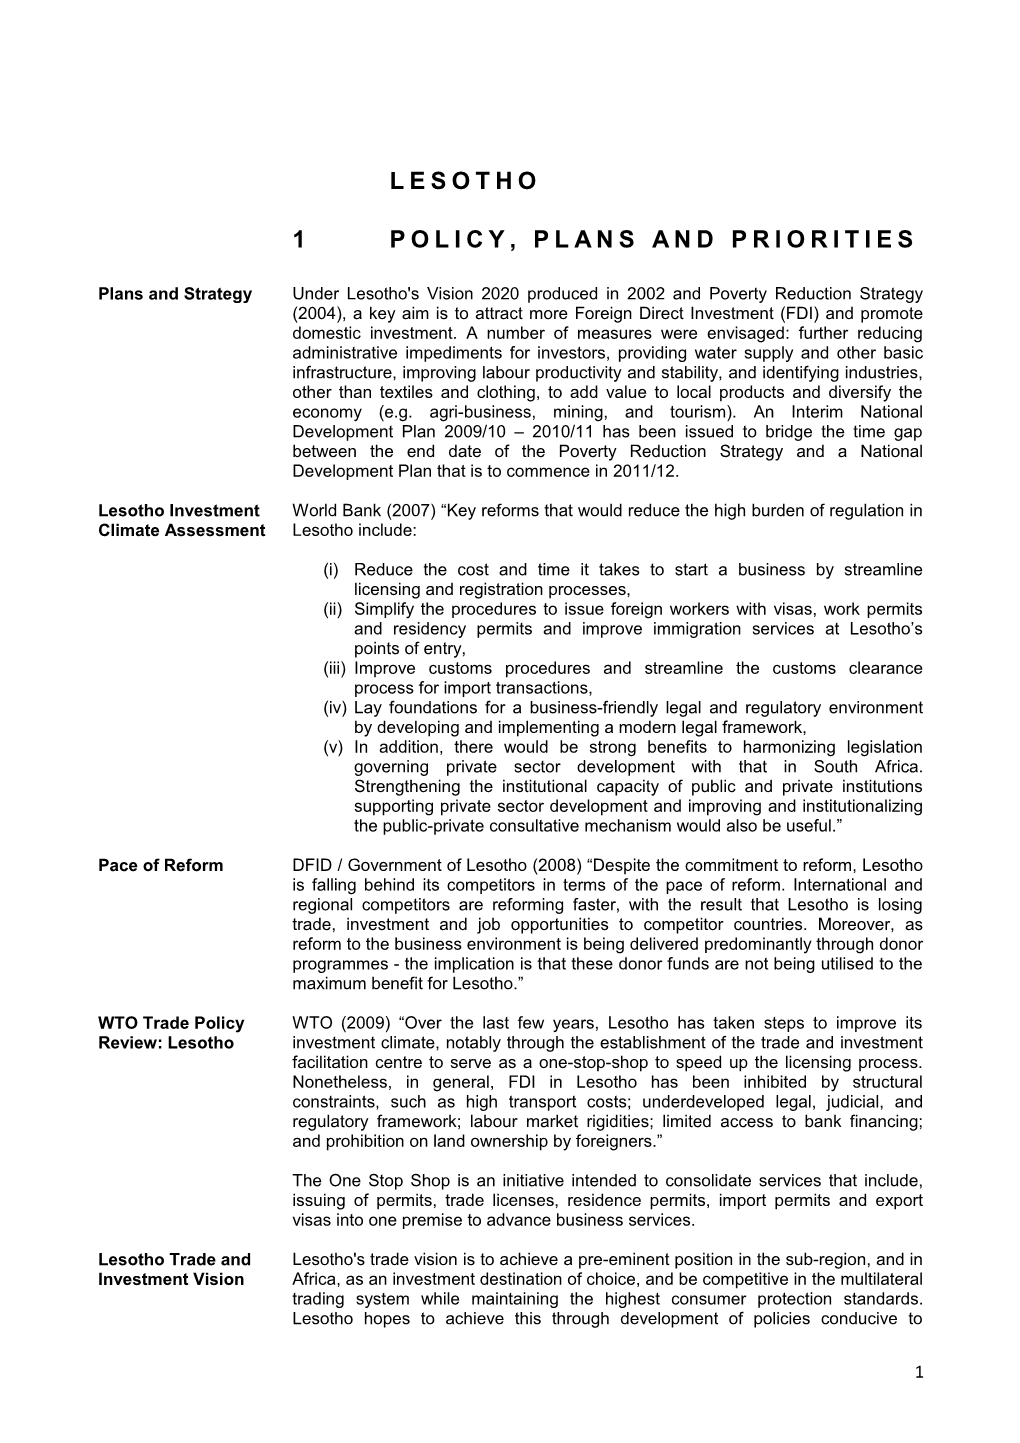 1 Policy, Plans and Priorities s1